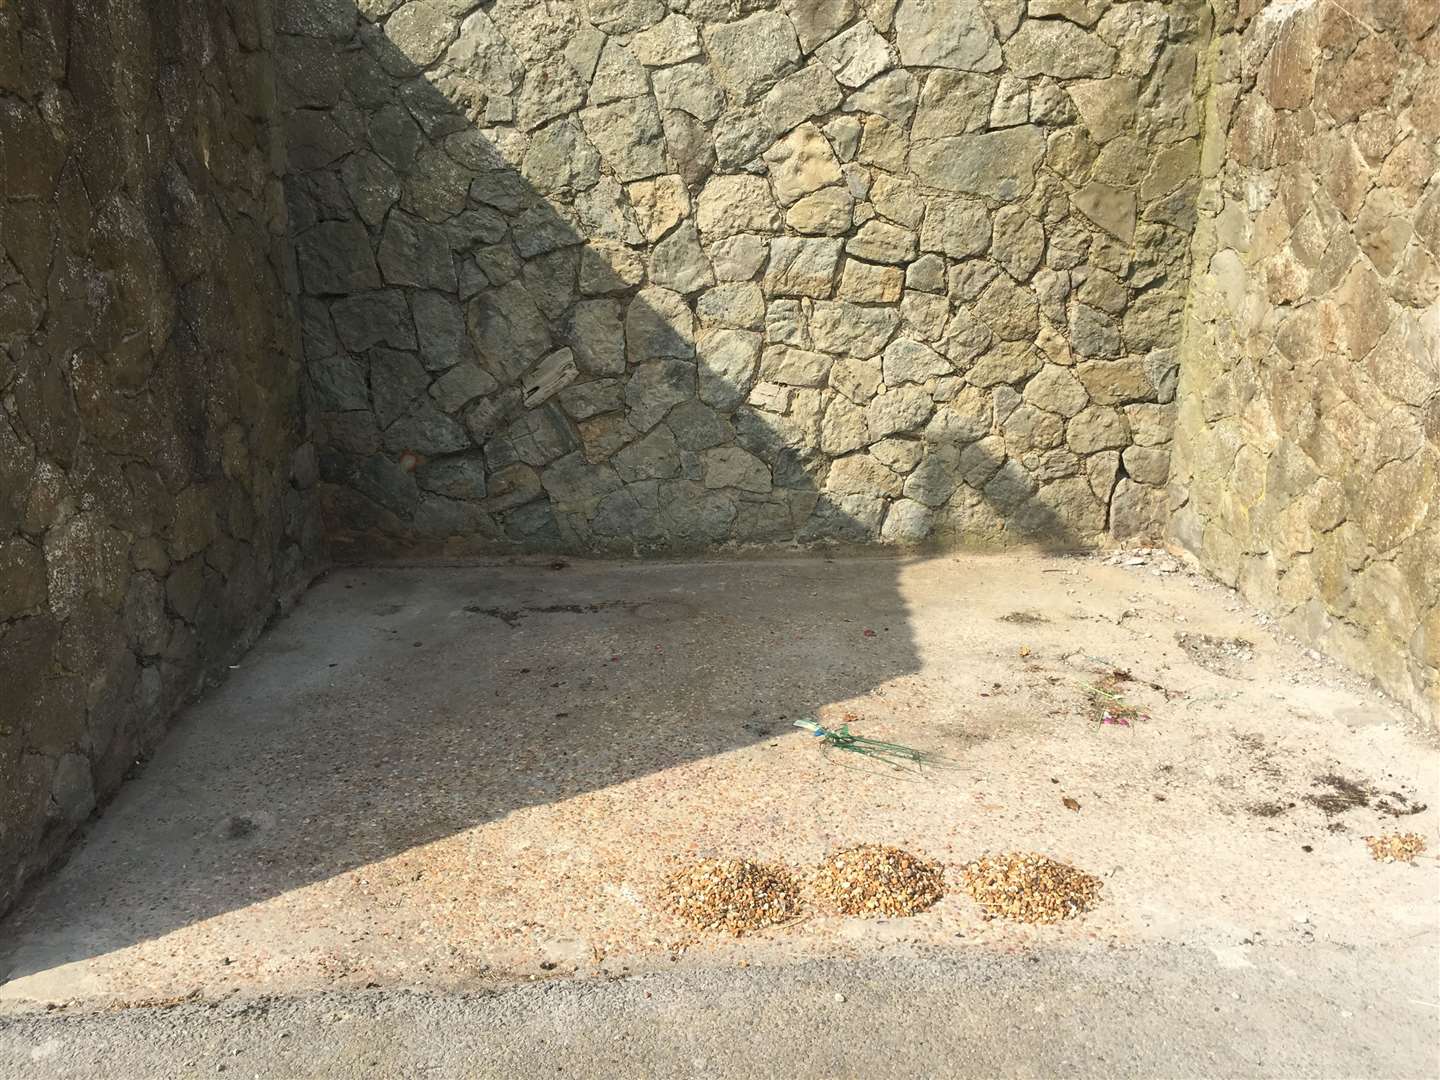 All that remains of the shelter